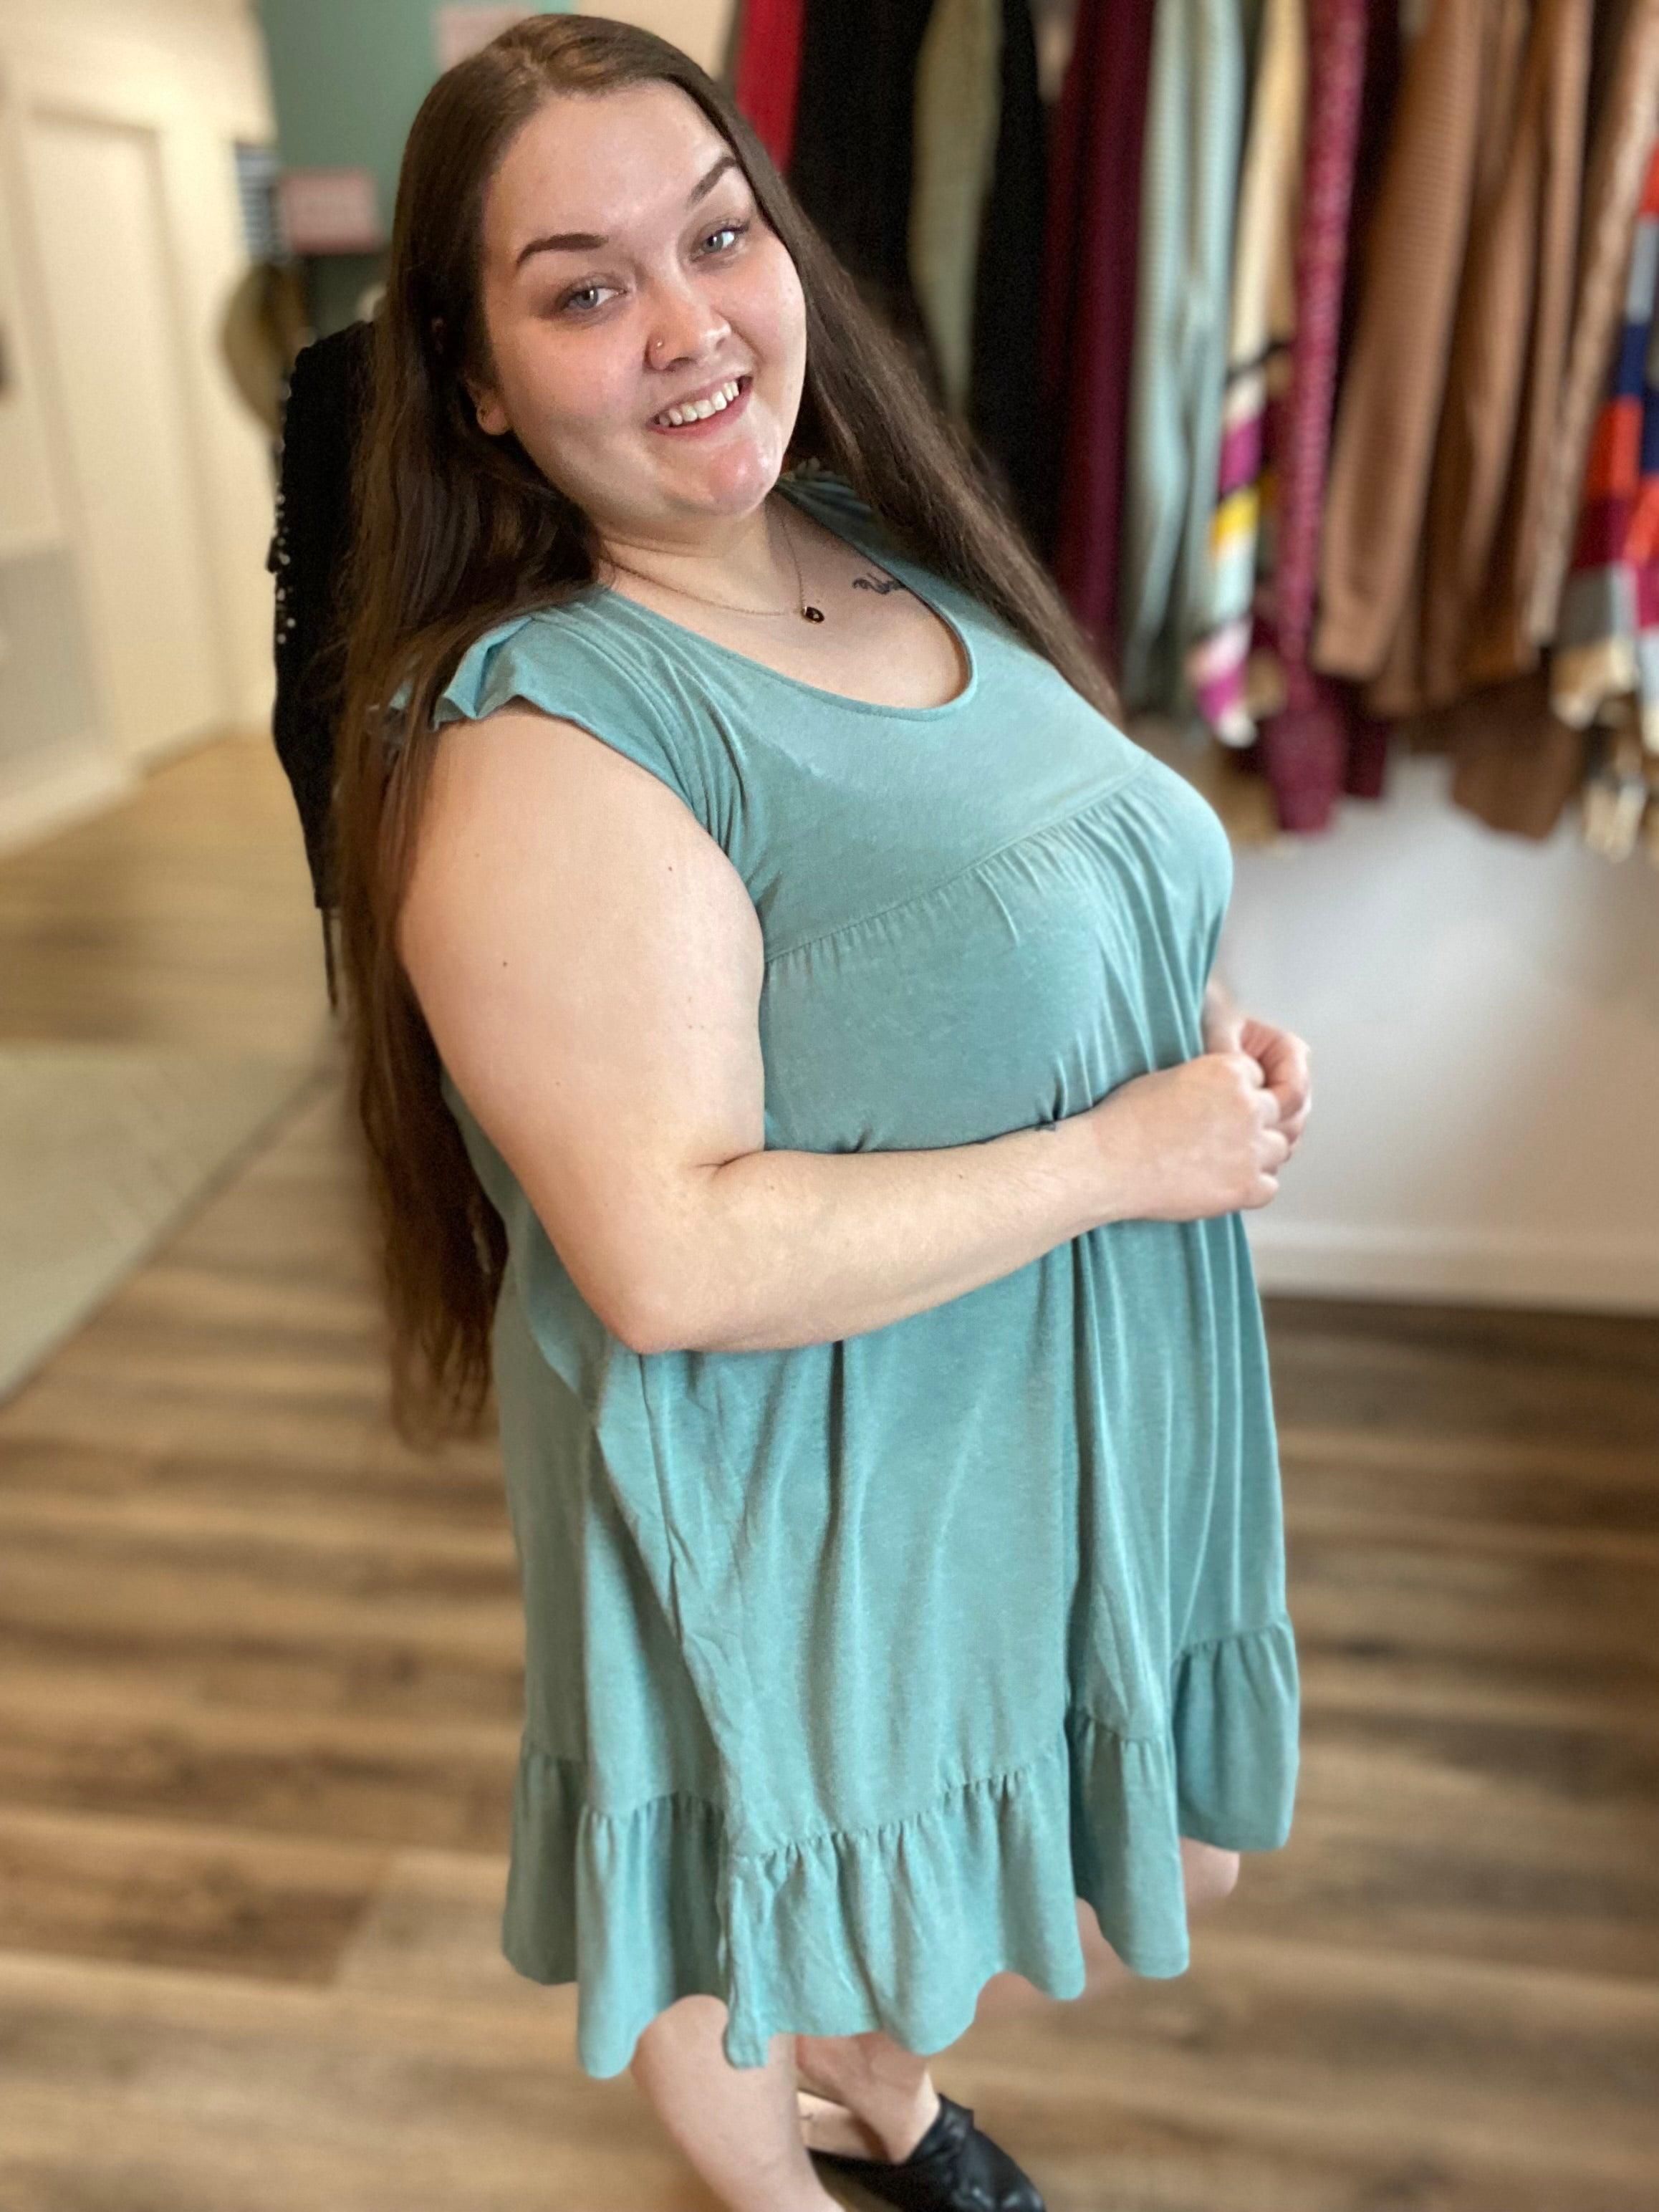 Shop Tie Back Babydoll Dress-Dresses at Ruby Joy Boutique, a Women's Clothing Store in Pickerington, Ohio